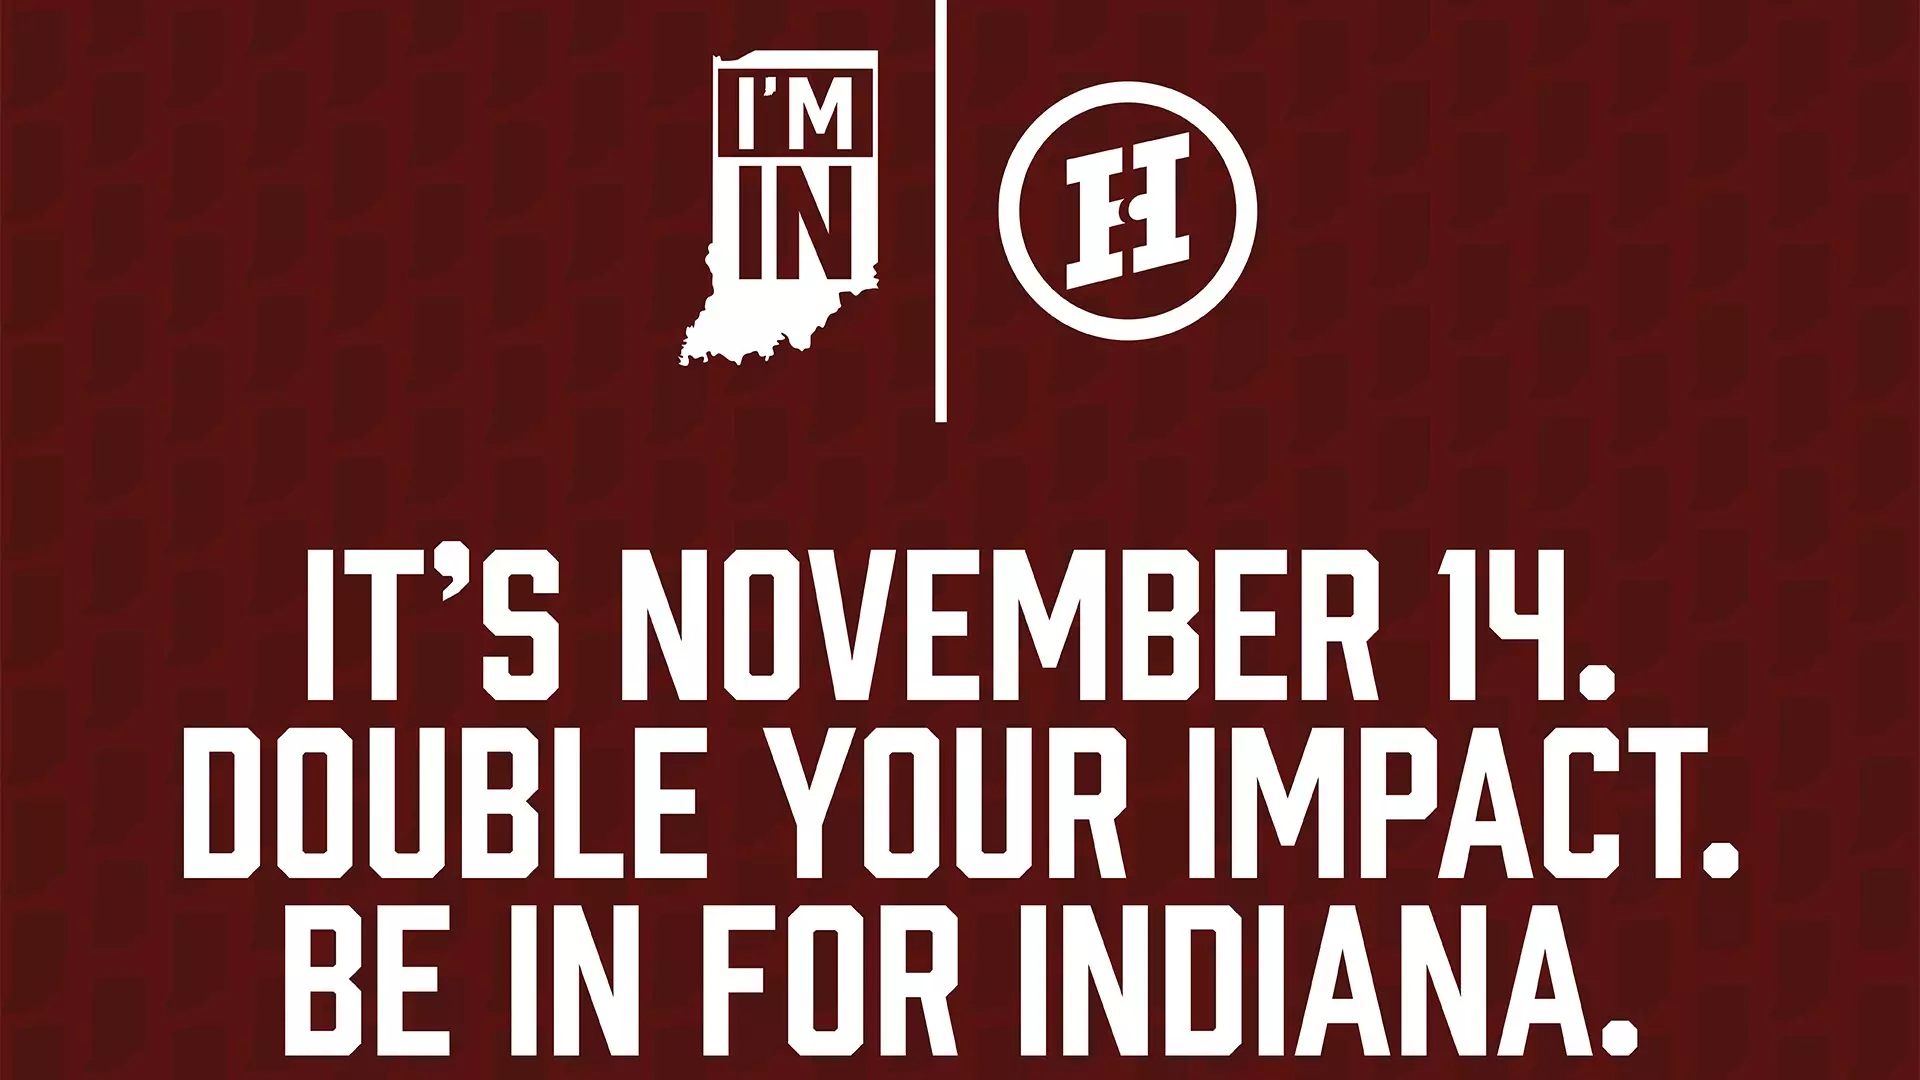 For the second consecutive year, an anonymous Indiana donor will match every donation up to $1M made to ‘Hoosiers For Good’ & ‘Hoosiers Connect'.